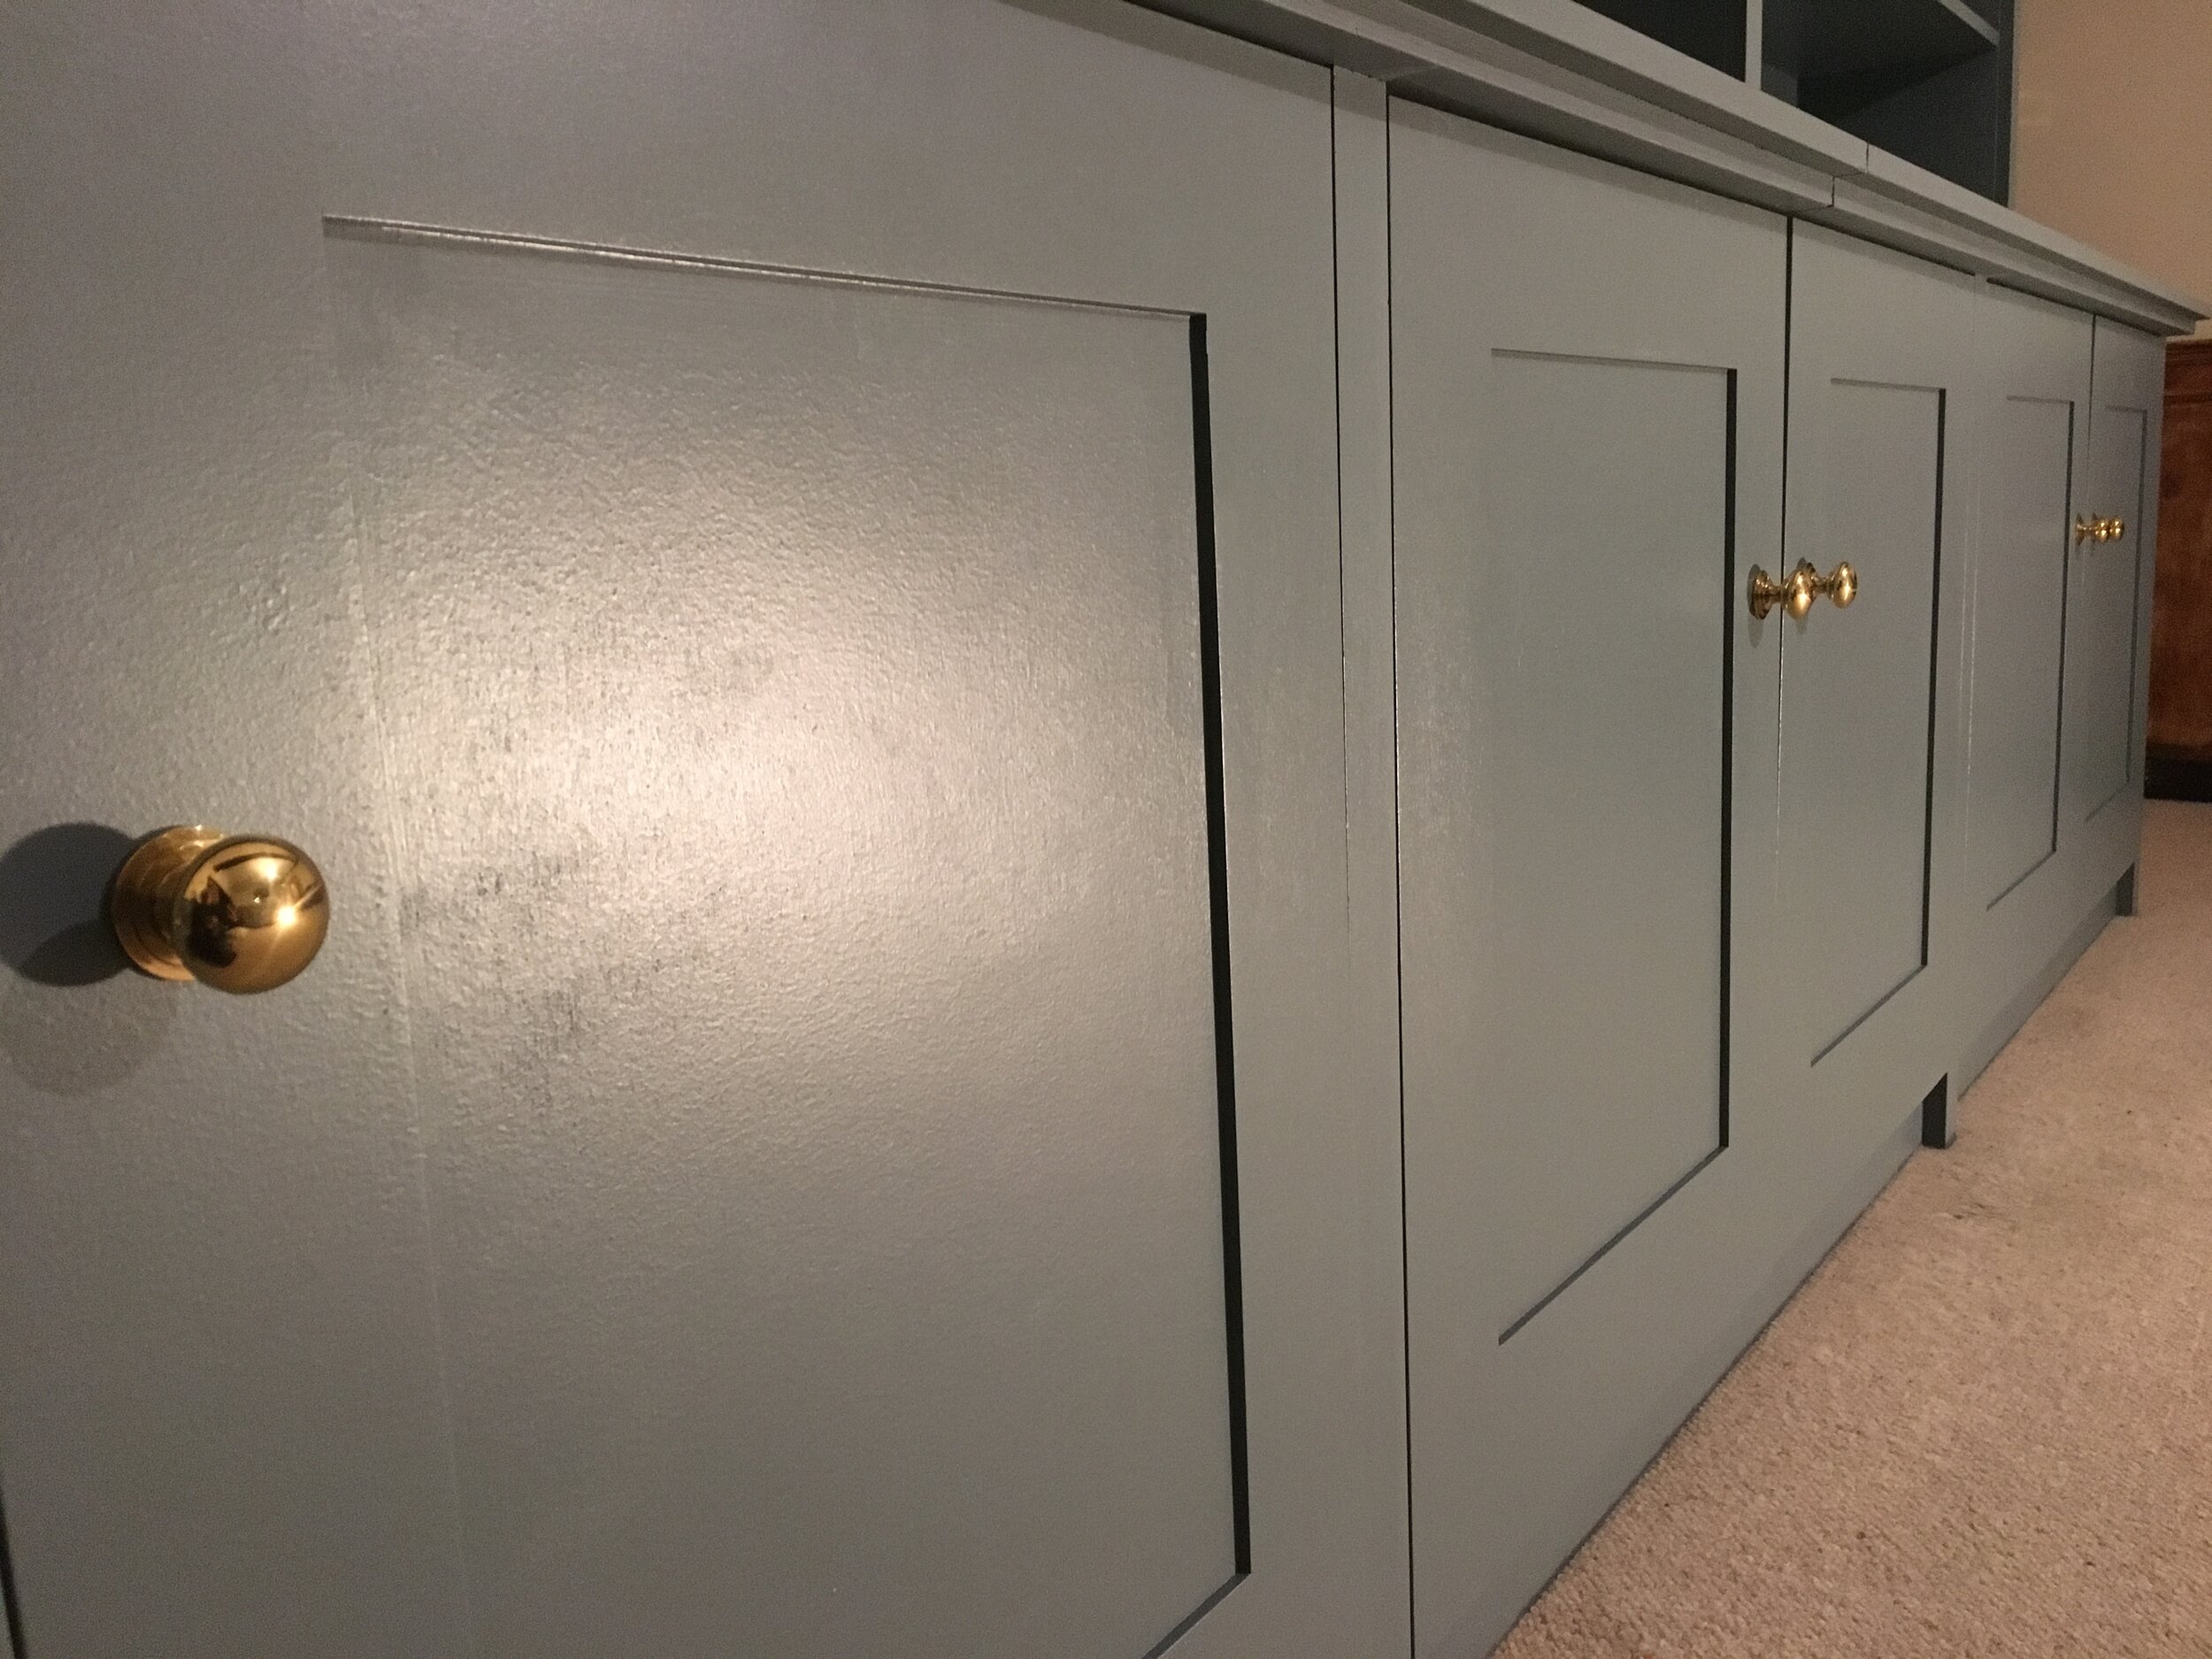 Panel doors with polished solid brass knobs